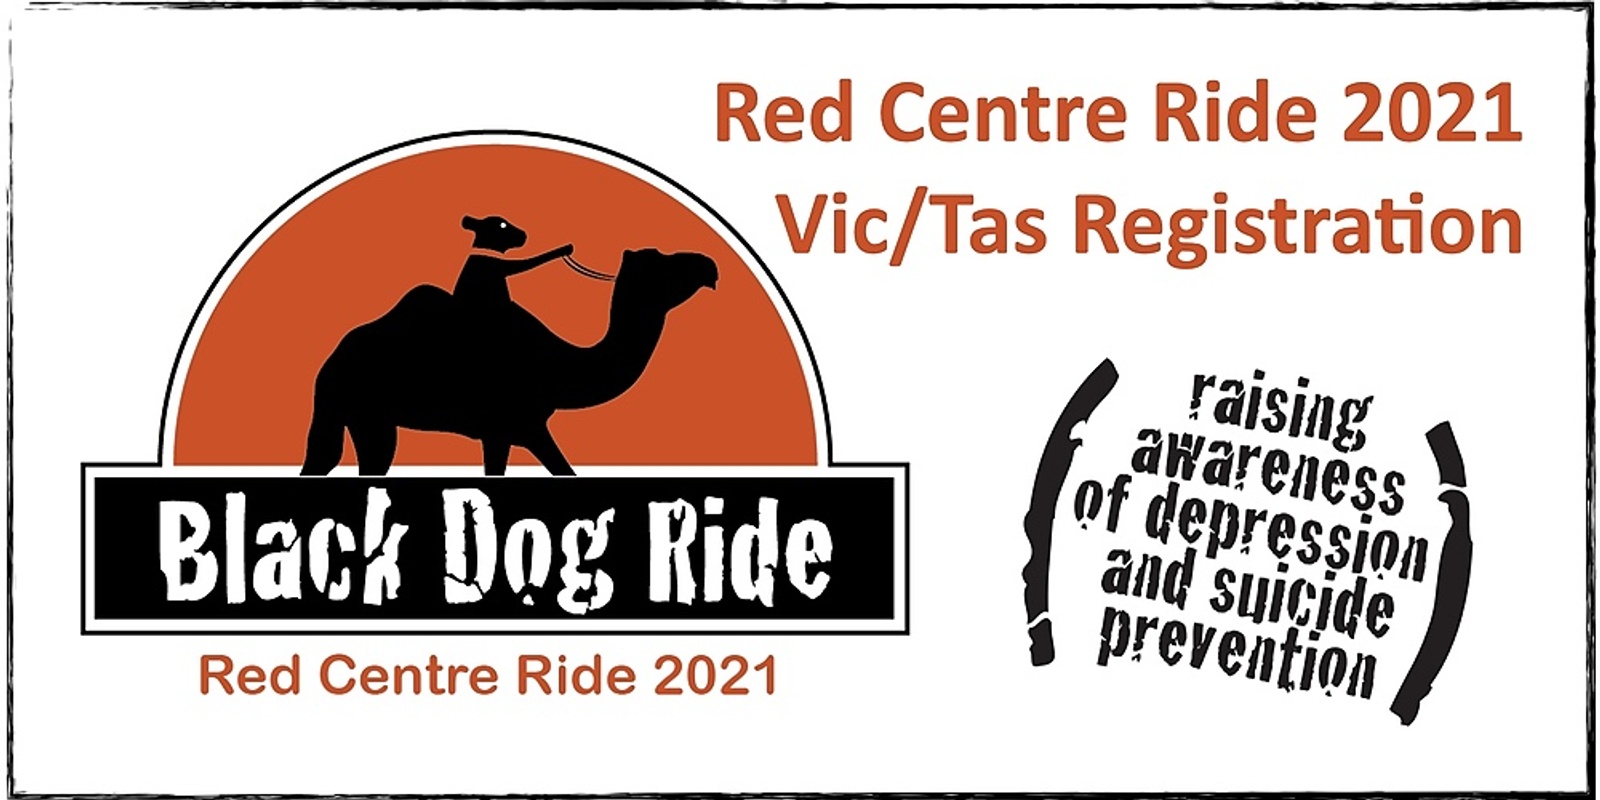 Banner image for Vic/Tas Black Dog Ride to the Red Centre 2021